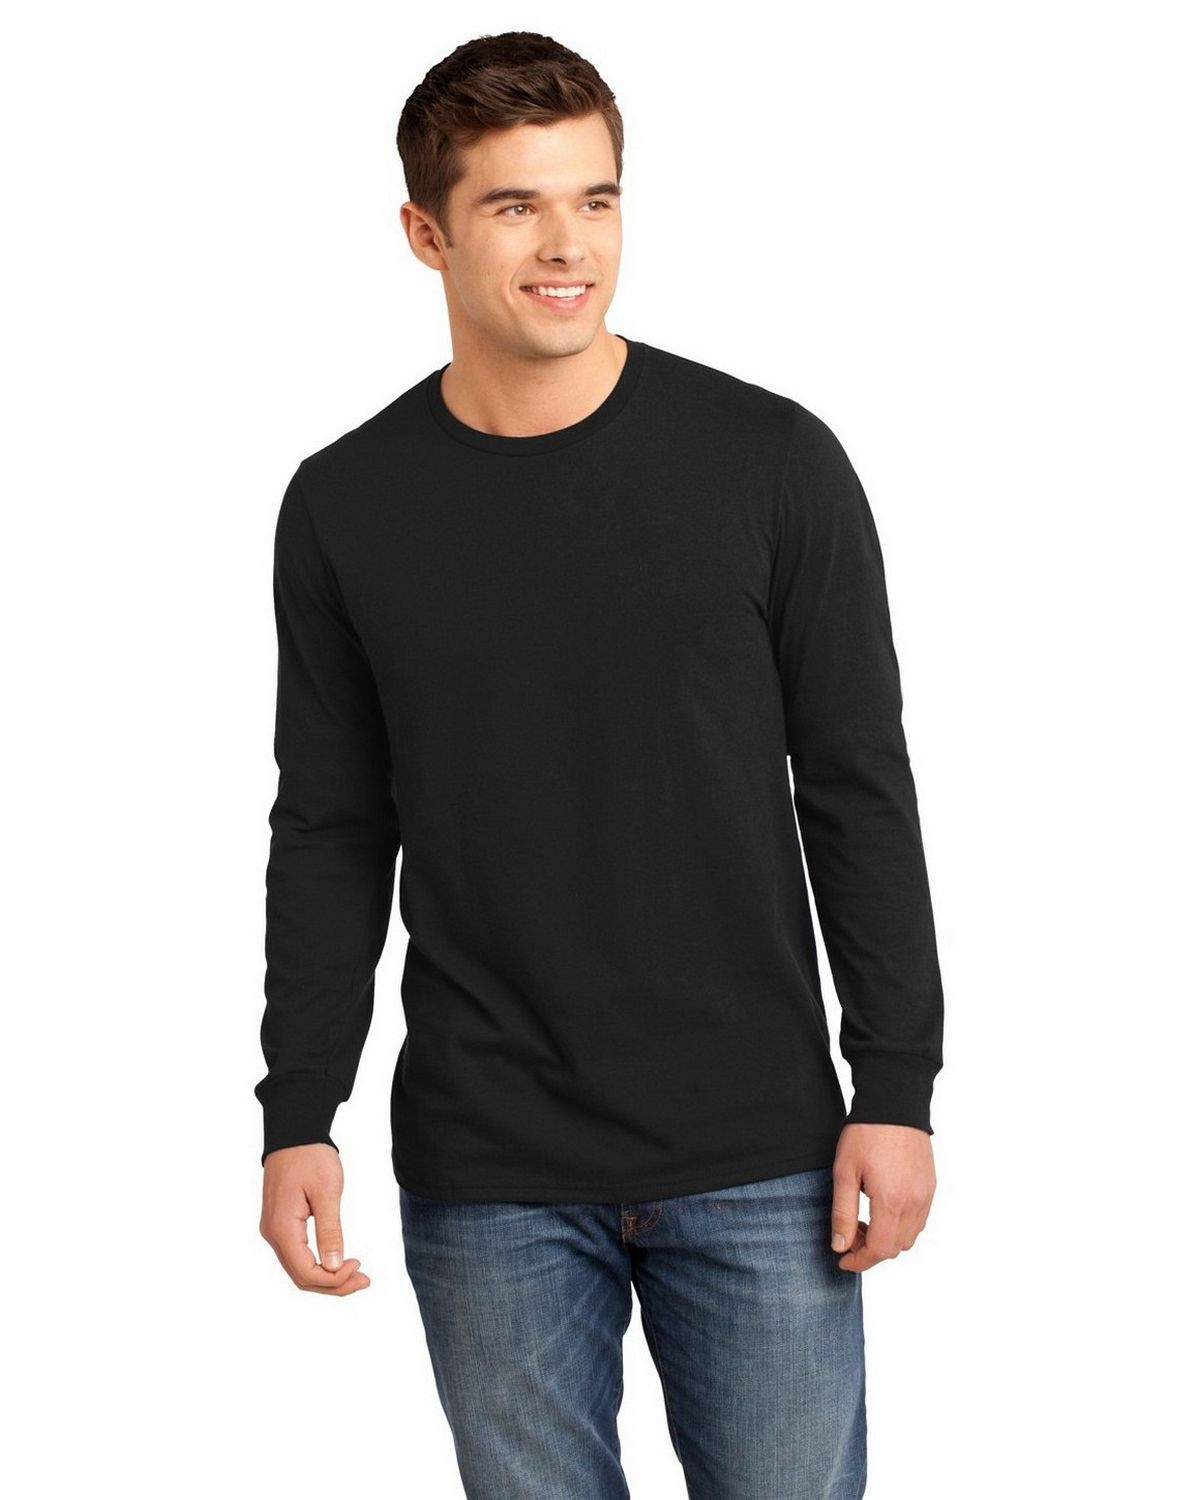 District DT5200 Young Mens Concert Tee Long Sleeve - ApparelnBags.com